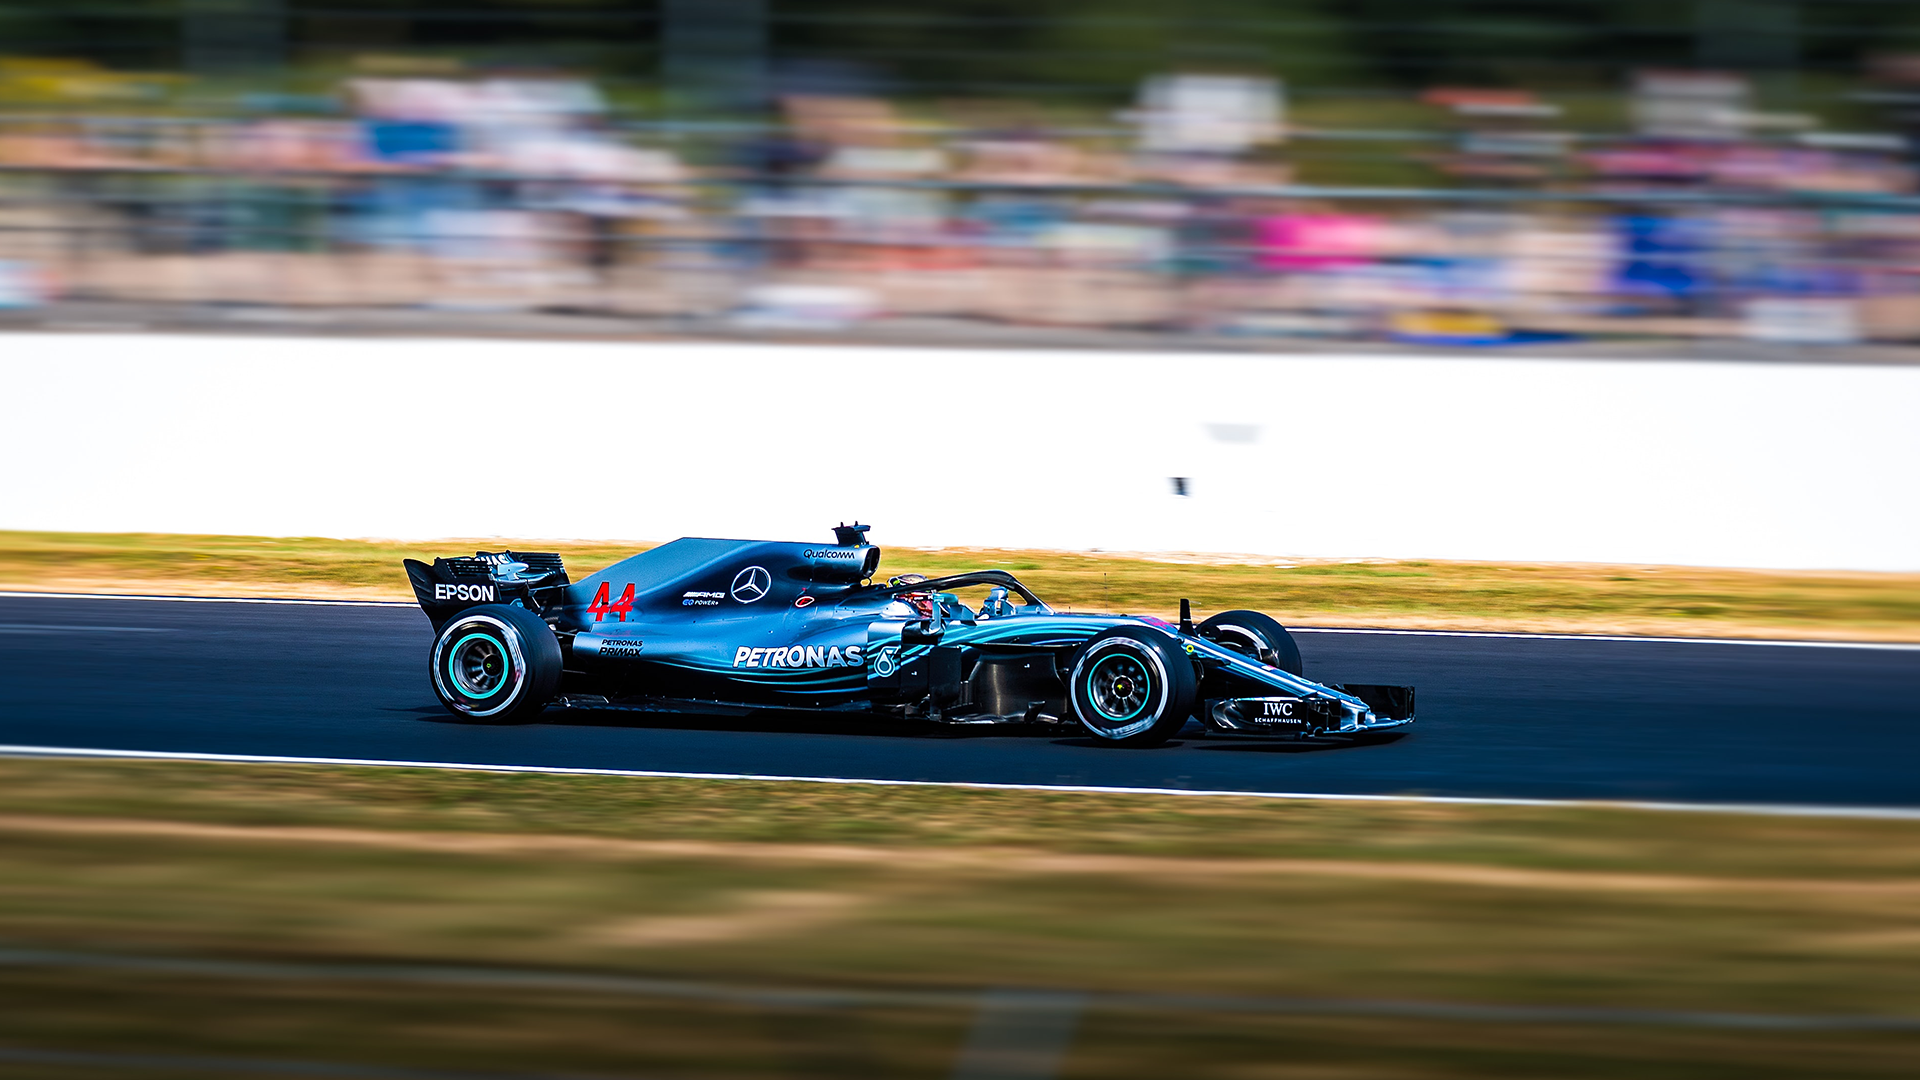 unsplash-logoCarl Jorgensen Lewis Hamilton driving the Mercedes AMG F1 W09 EQ Power  in 2018 at Silverstone. Hamilton has been repeatedly linked with the Scuderia since he met Ferrari chairman John Elkann at a social event in 2019, but he has recently publicised his commitment to Mercedes as a rebuttal to the rumours.